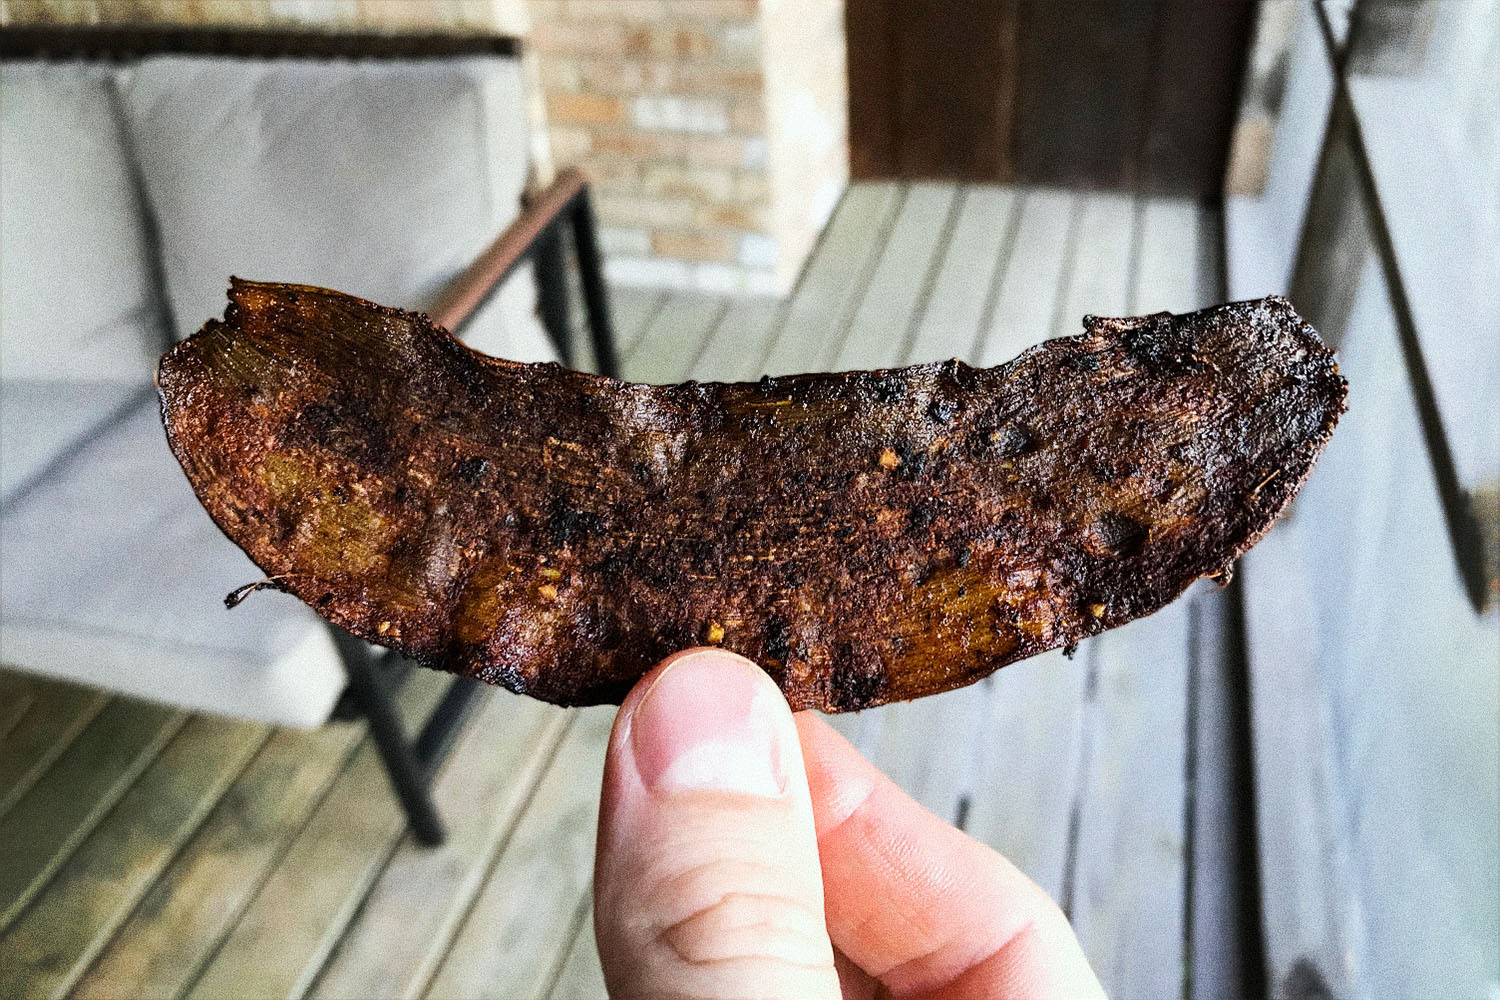 Holding up a crispy piece of banana peel bacon. The fake meat recipe went viral, but is it any good?